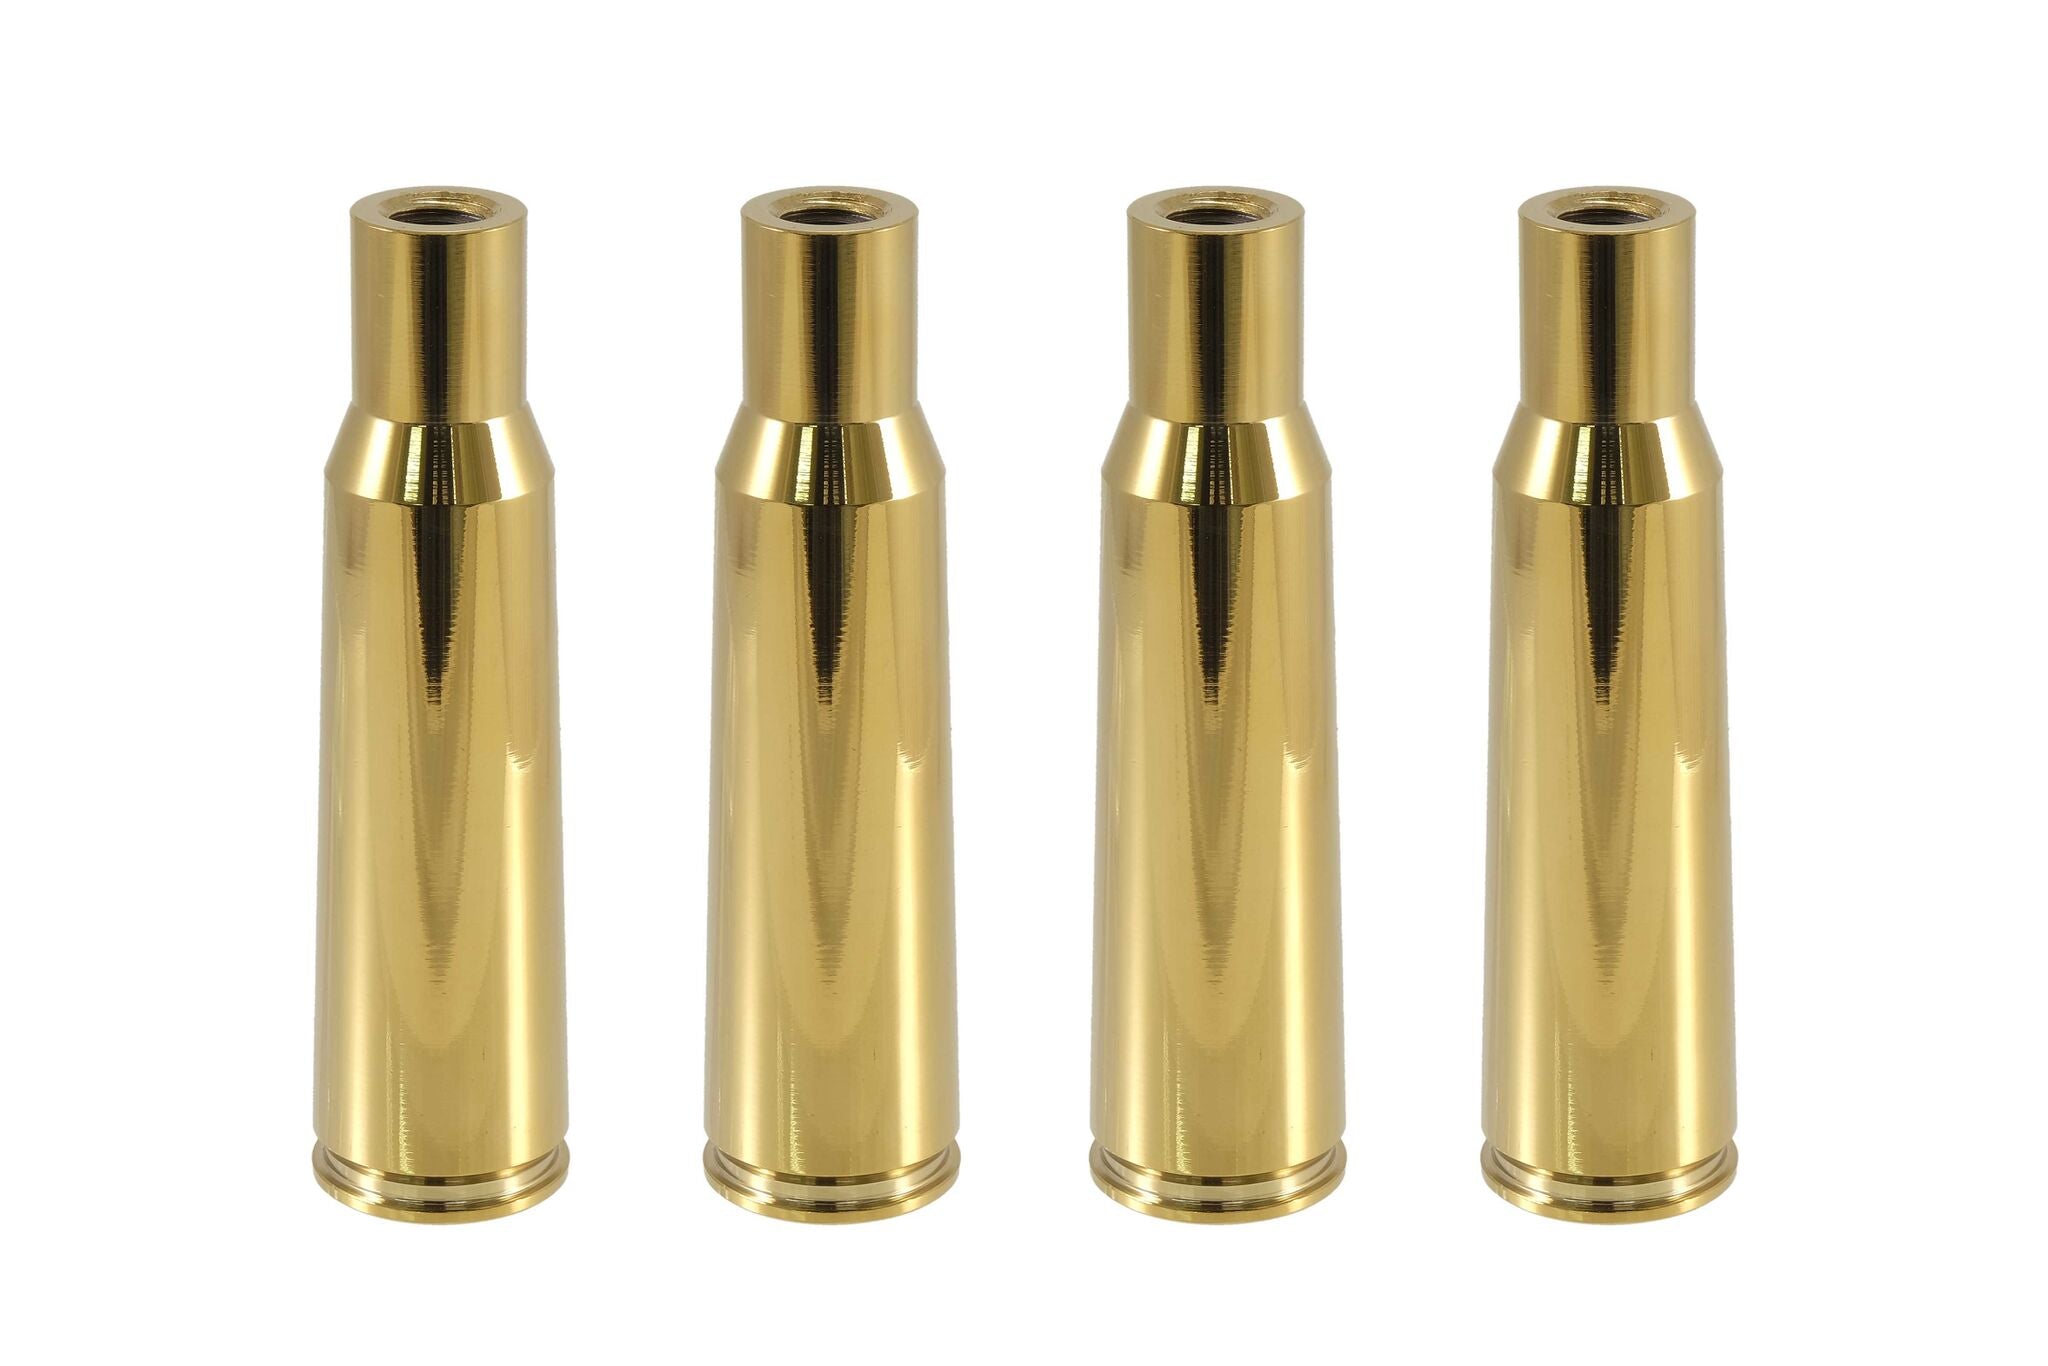 BULLET CASING 50 CAL CALIBER 5.5 INCHES LONG LUG NUT CAPS CNC MACHINED